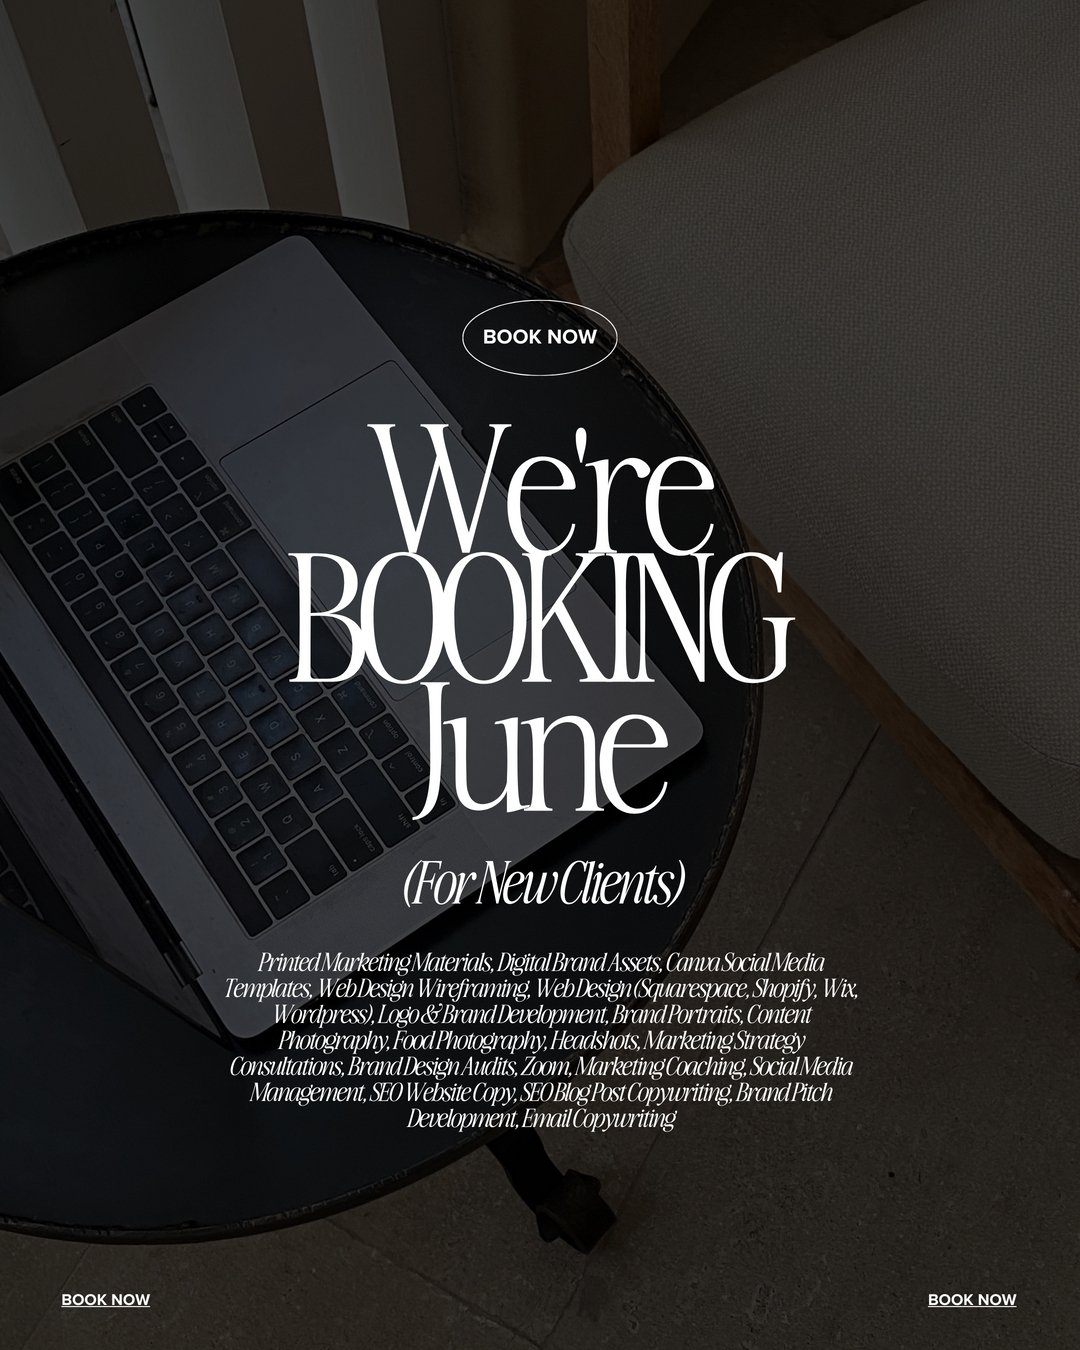 We're booking June and onwards! ✌🏻 If you're a new client and you're interested in booking our services for graphic design, web design, marketing or photography projects, please reach out to secure your position in our calendar for next month.

Than